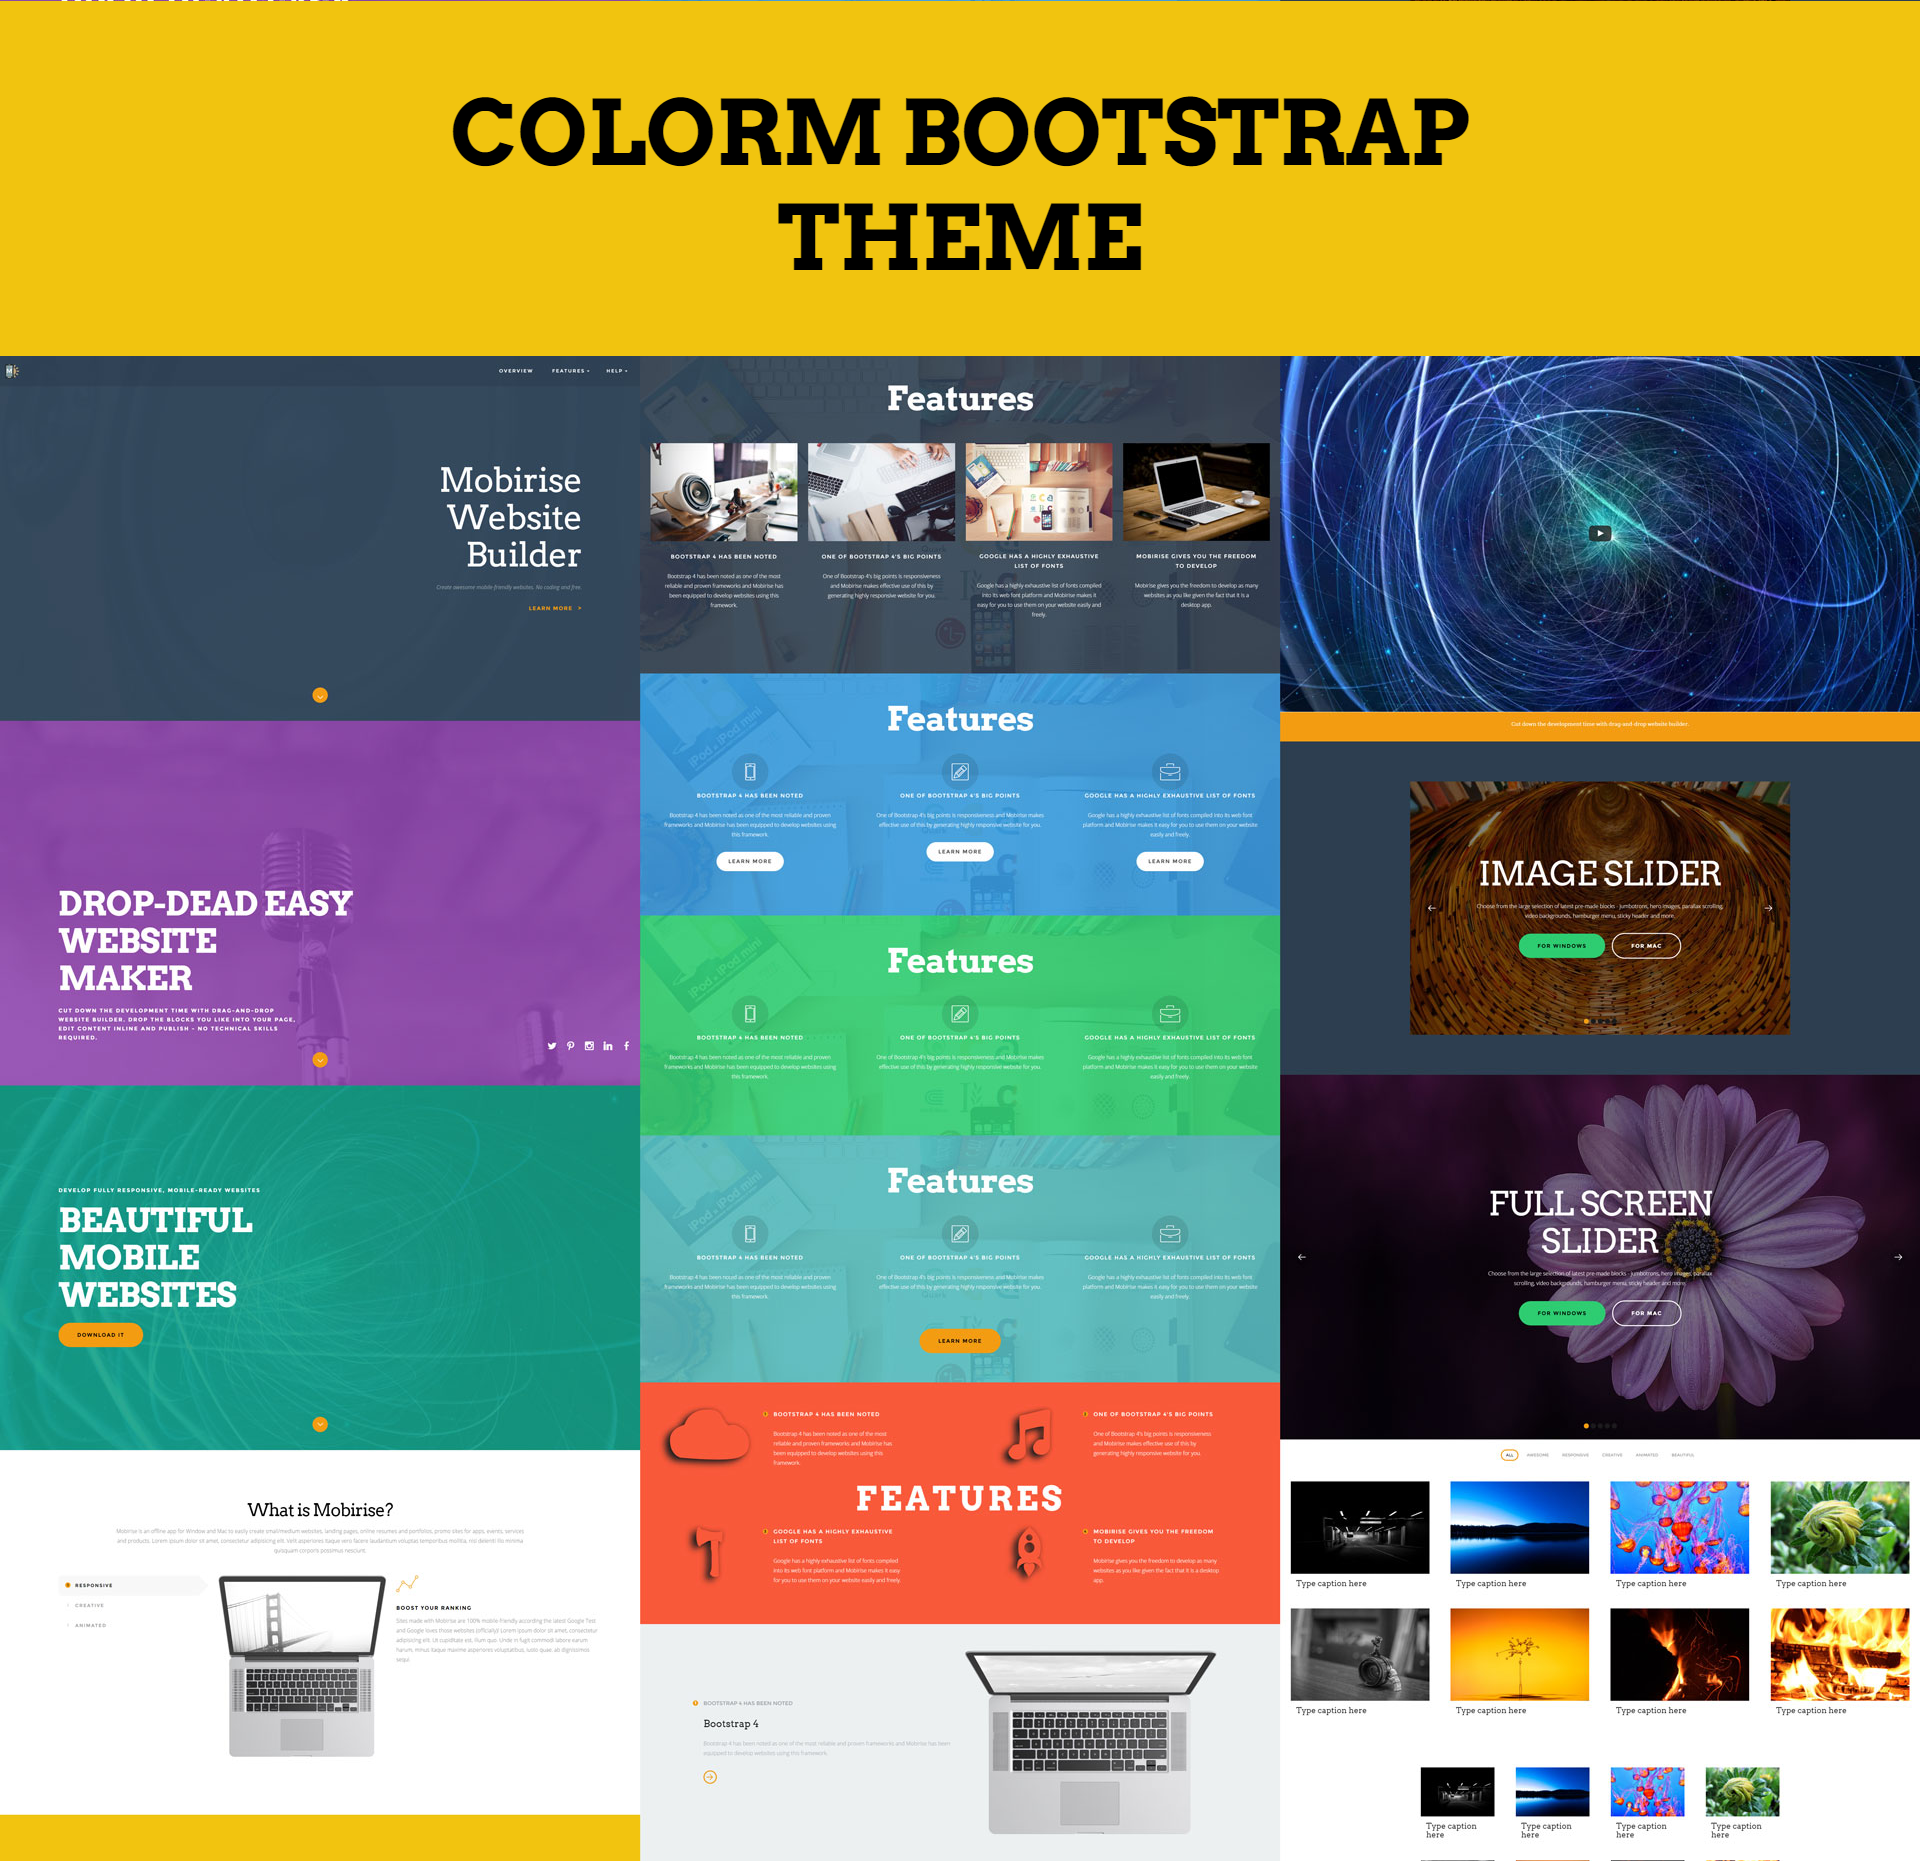 Free Download Bootstrap ColorM Themes